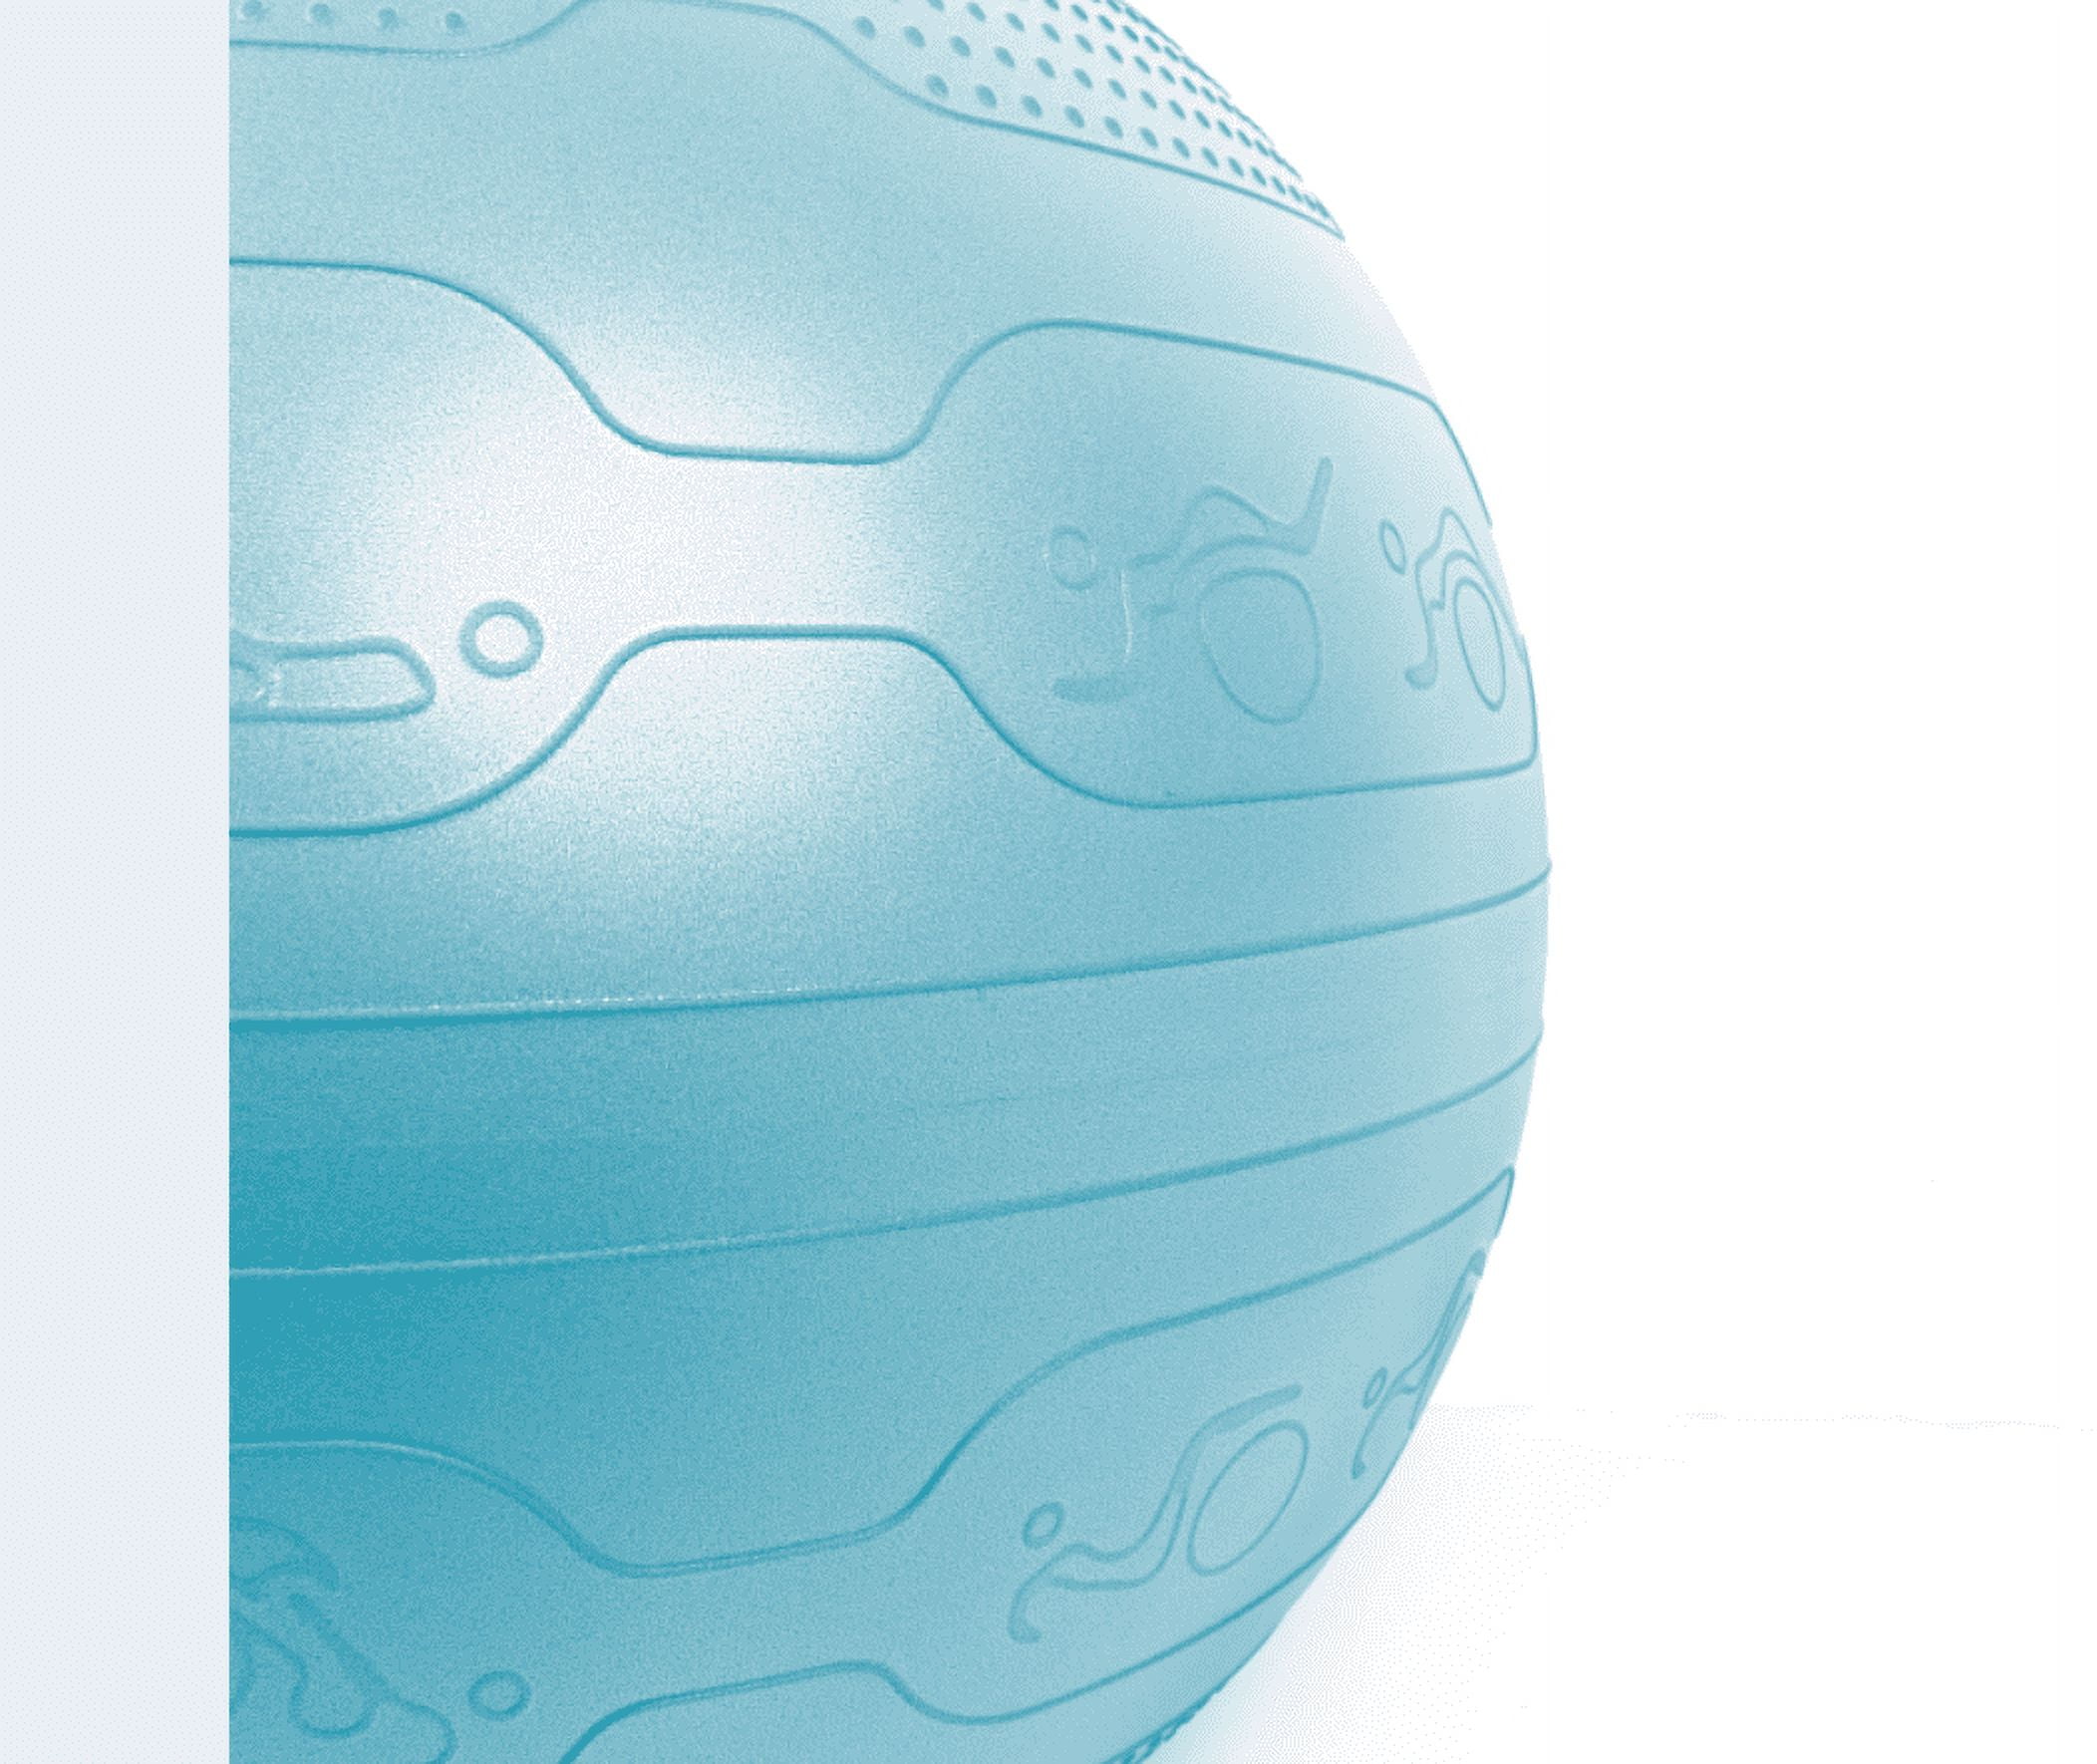 TKO 75cm Fitness Balance Ball TR0217-BLA, Color: Blue - JCPenney